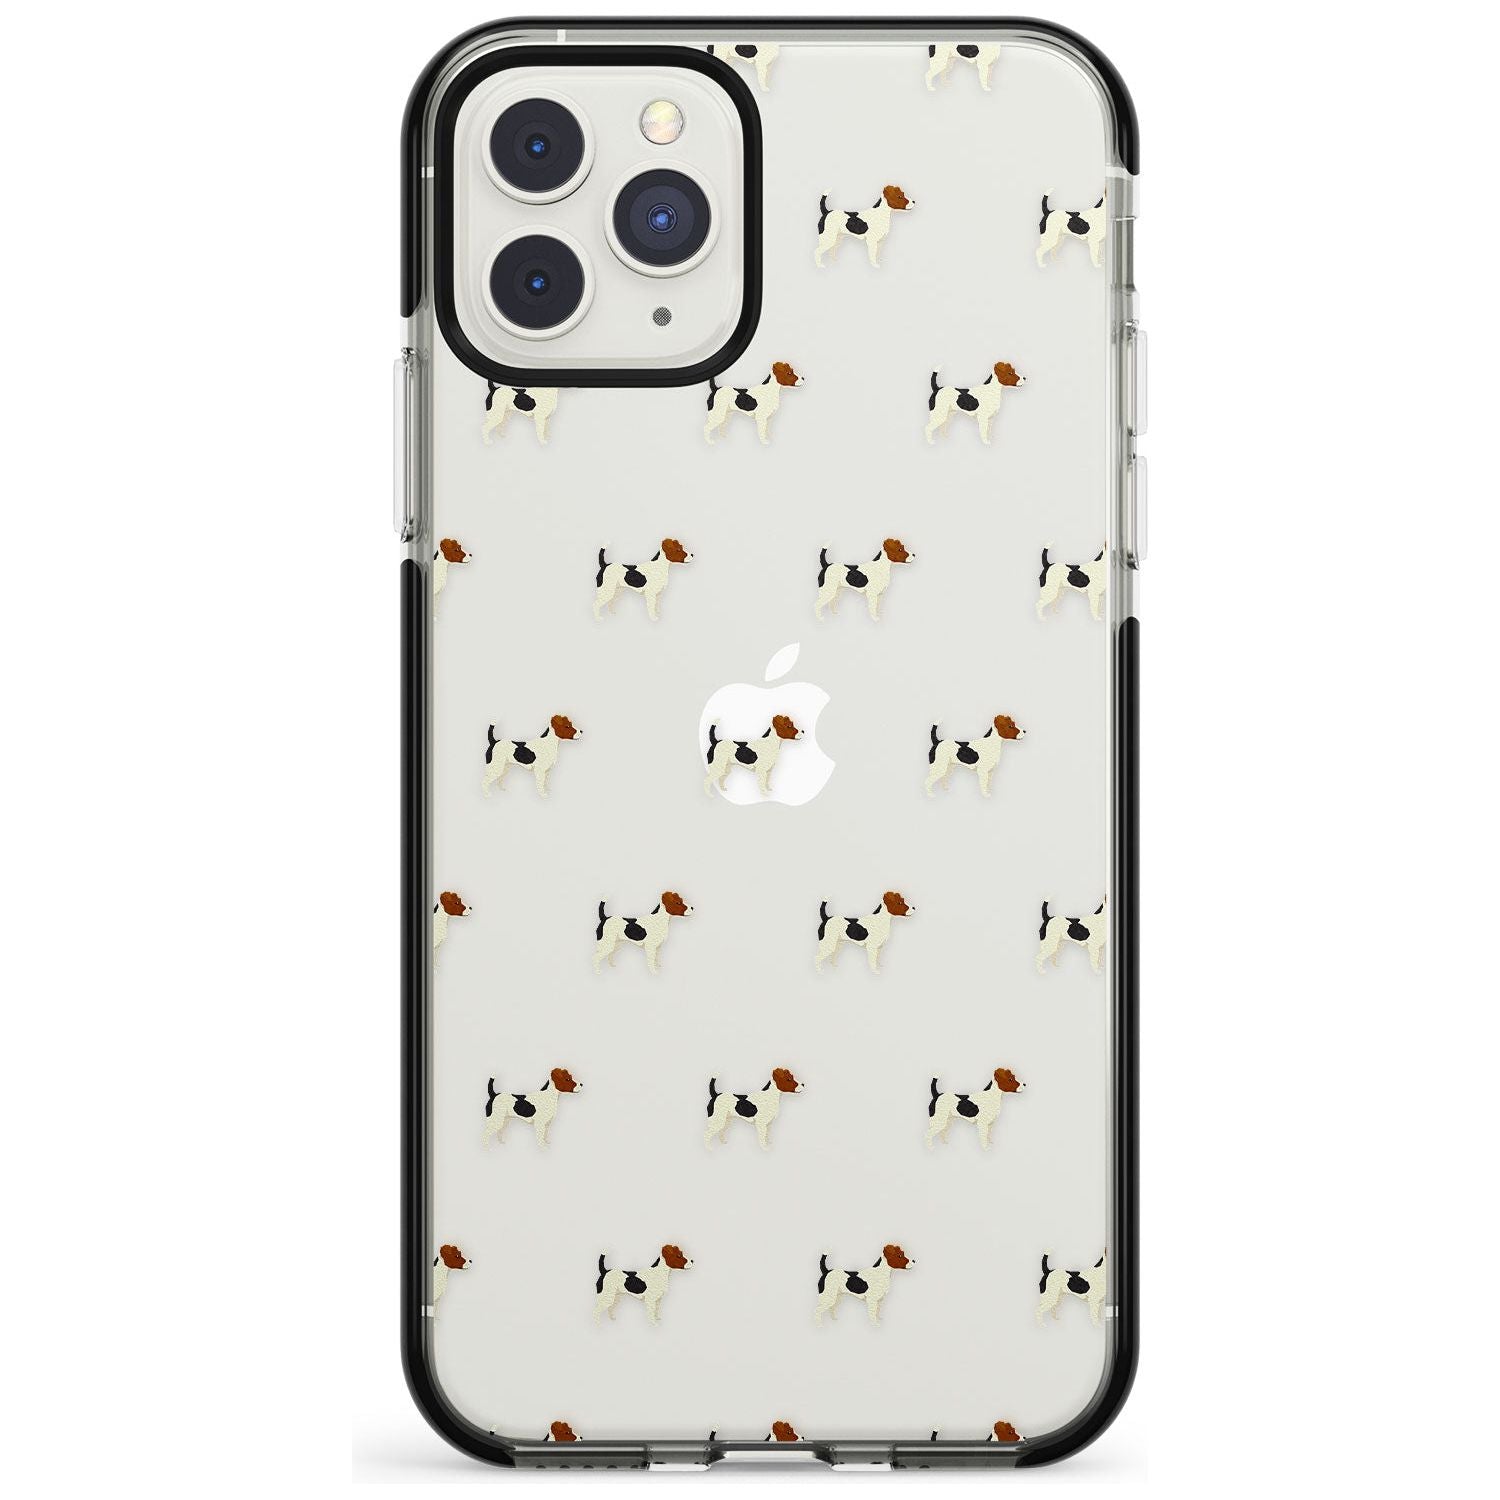 Jack Russell Terrier Dog Pattern Clear Black Impact Phone Case for iPhone 11 Pro Max